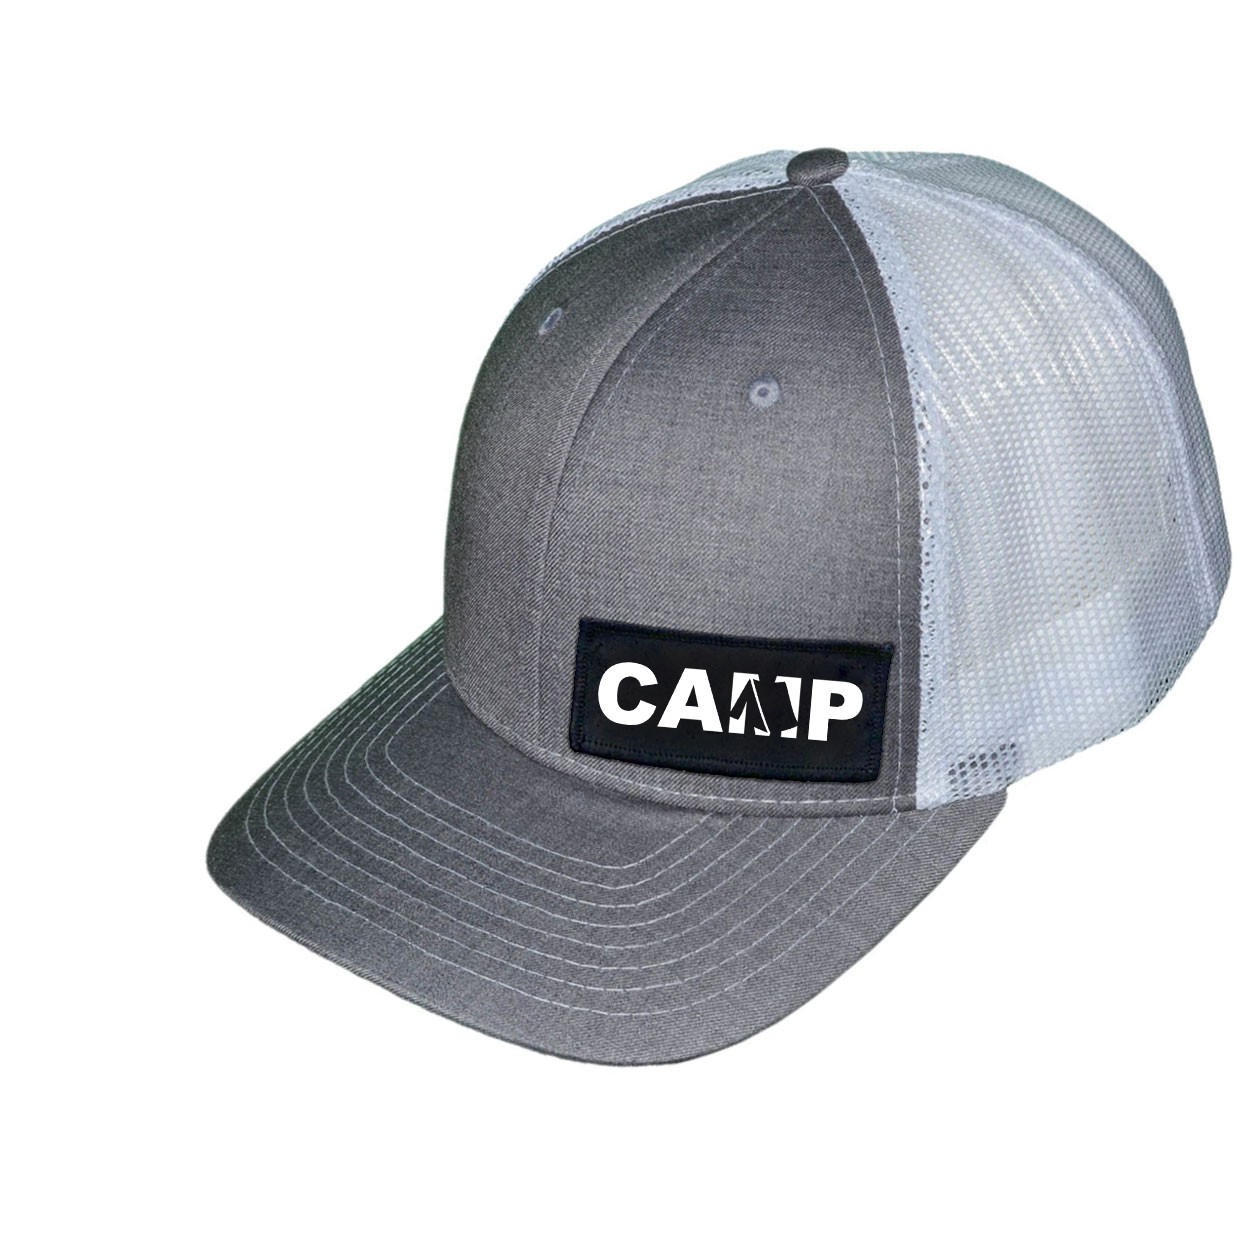 Camp Tent Logo Night Out Woven Patch Snapback Trucker Hat Heather Gray/White (White Logo)